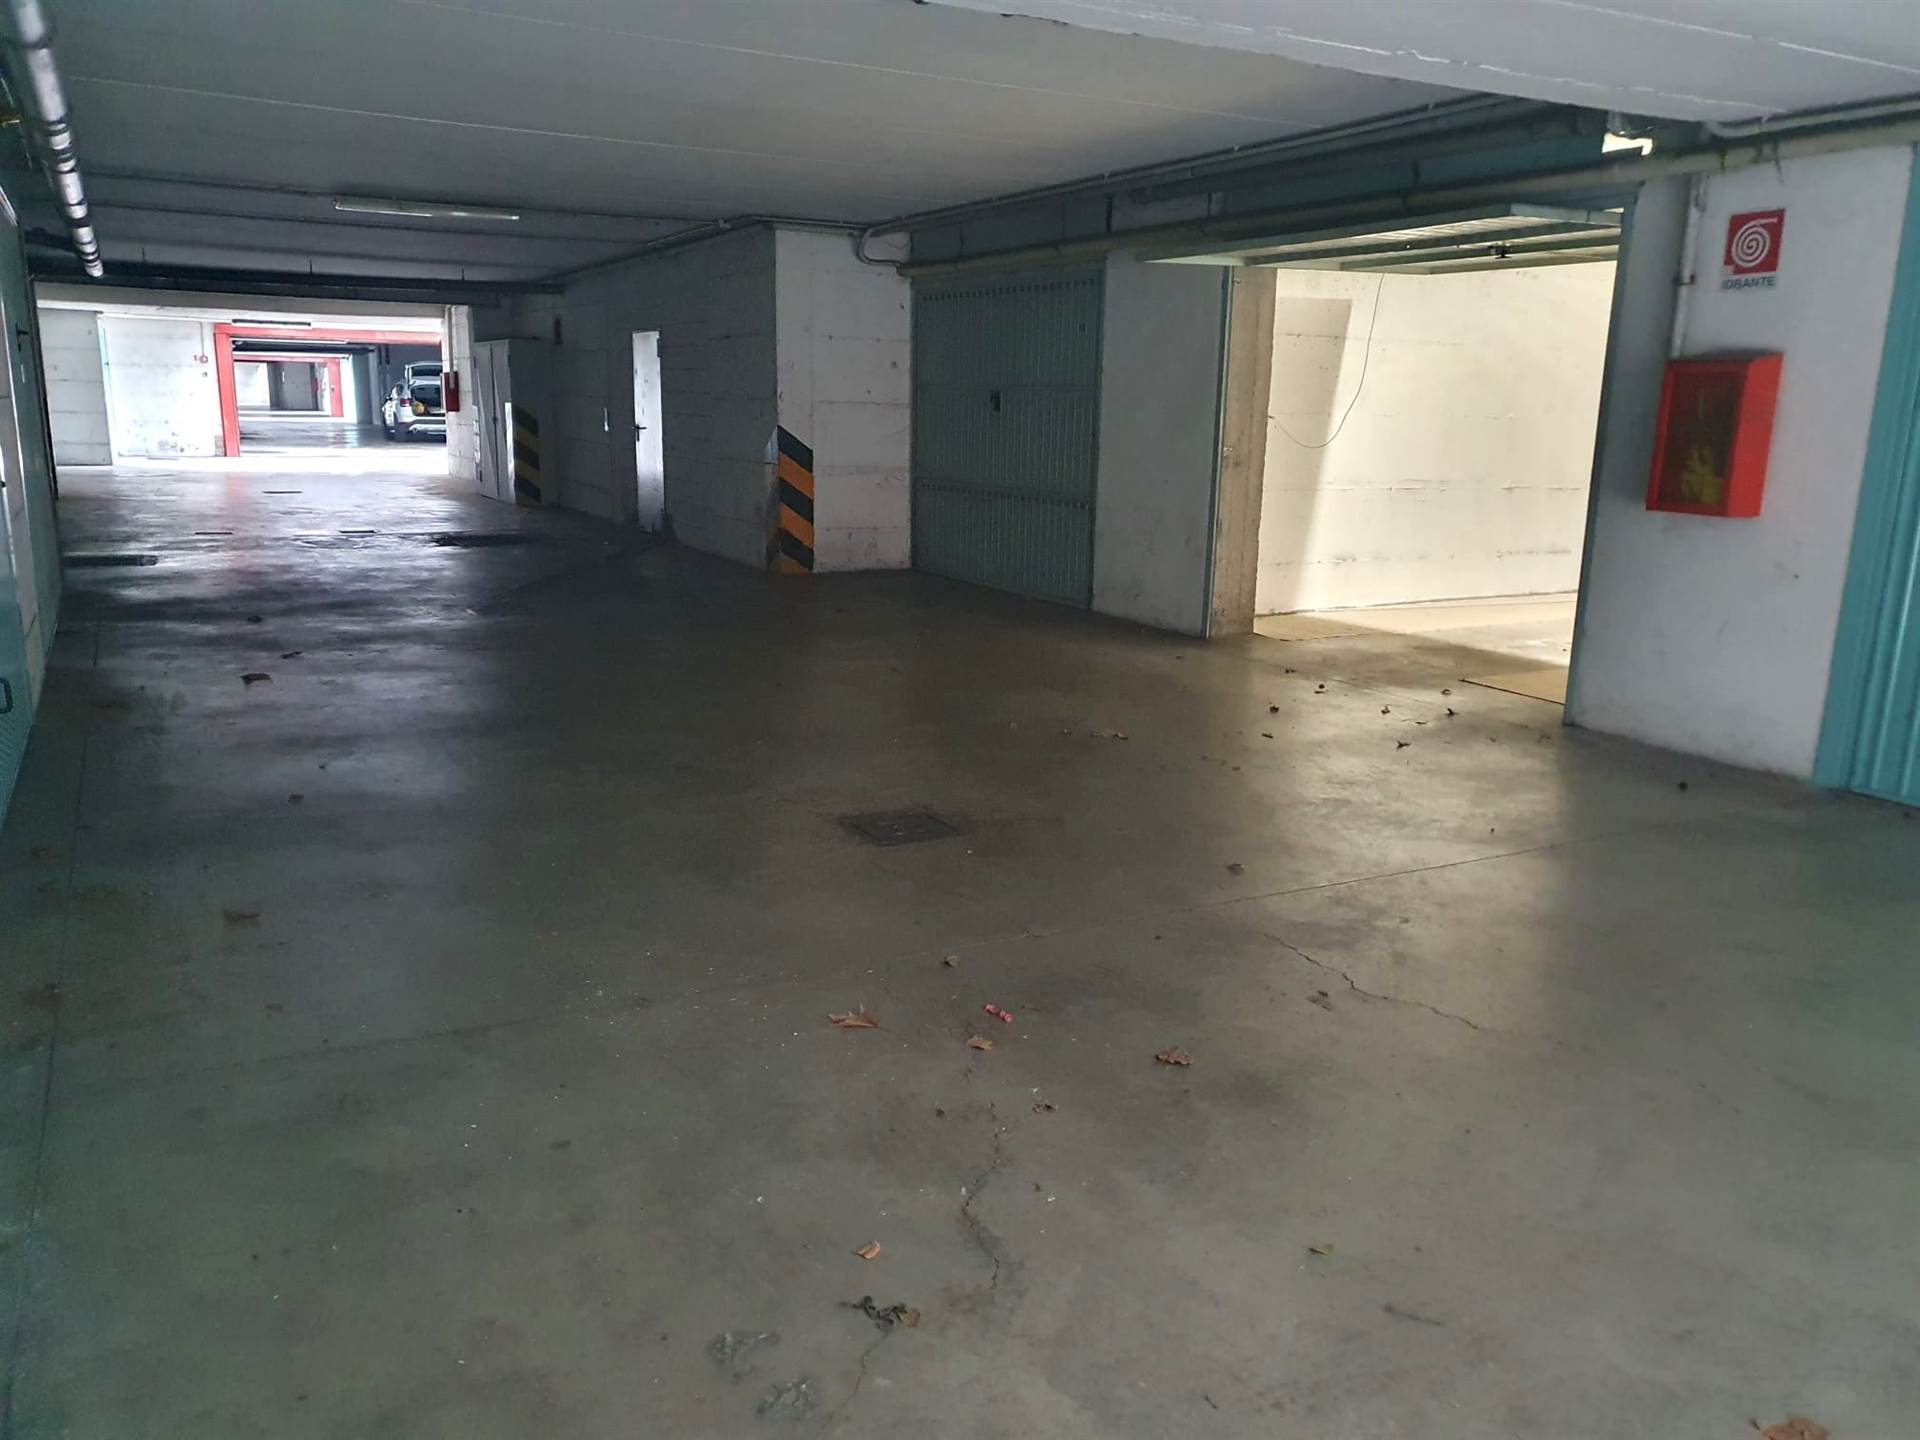 SESTO SAN GIOVANNI, Garage / Parking space for sale of 22 Sq. mt., Energetic class: Not subject, placed at Buried, composed by: 1 Room, Double Box, 